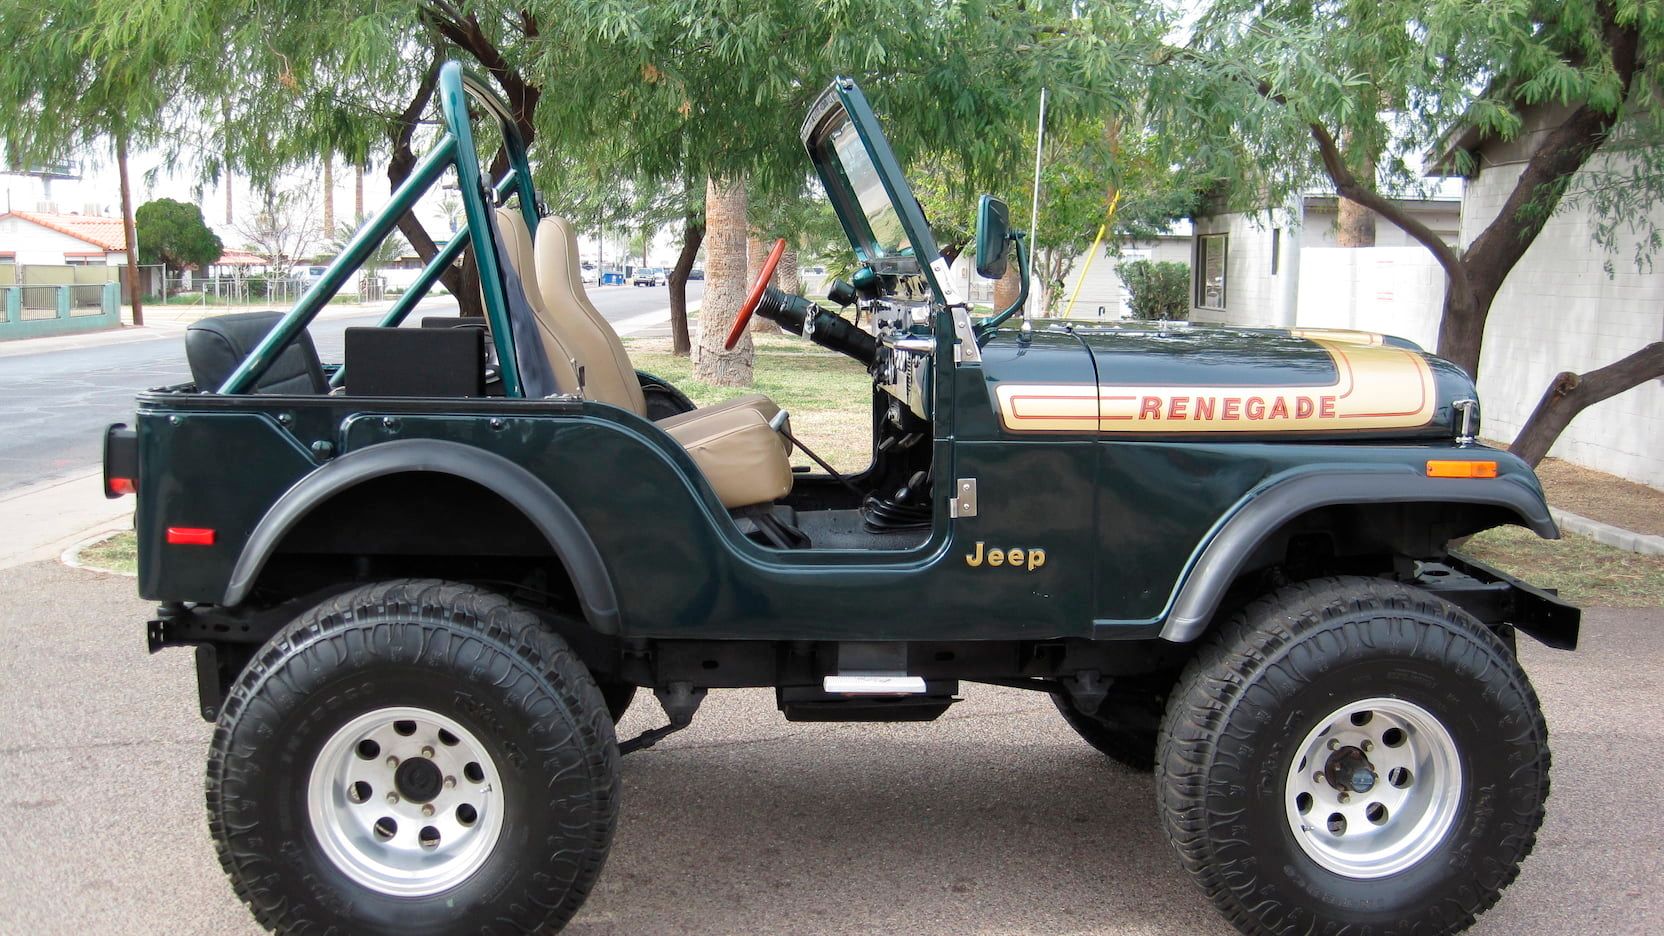 A parked Jeep CJ-5 from 1976